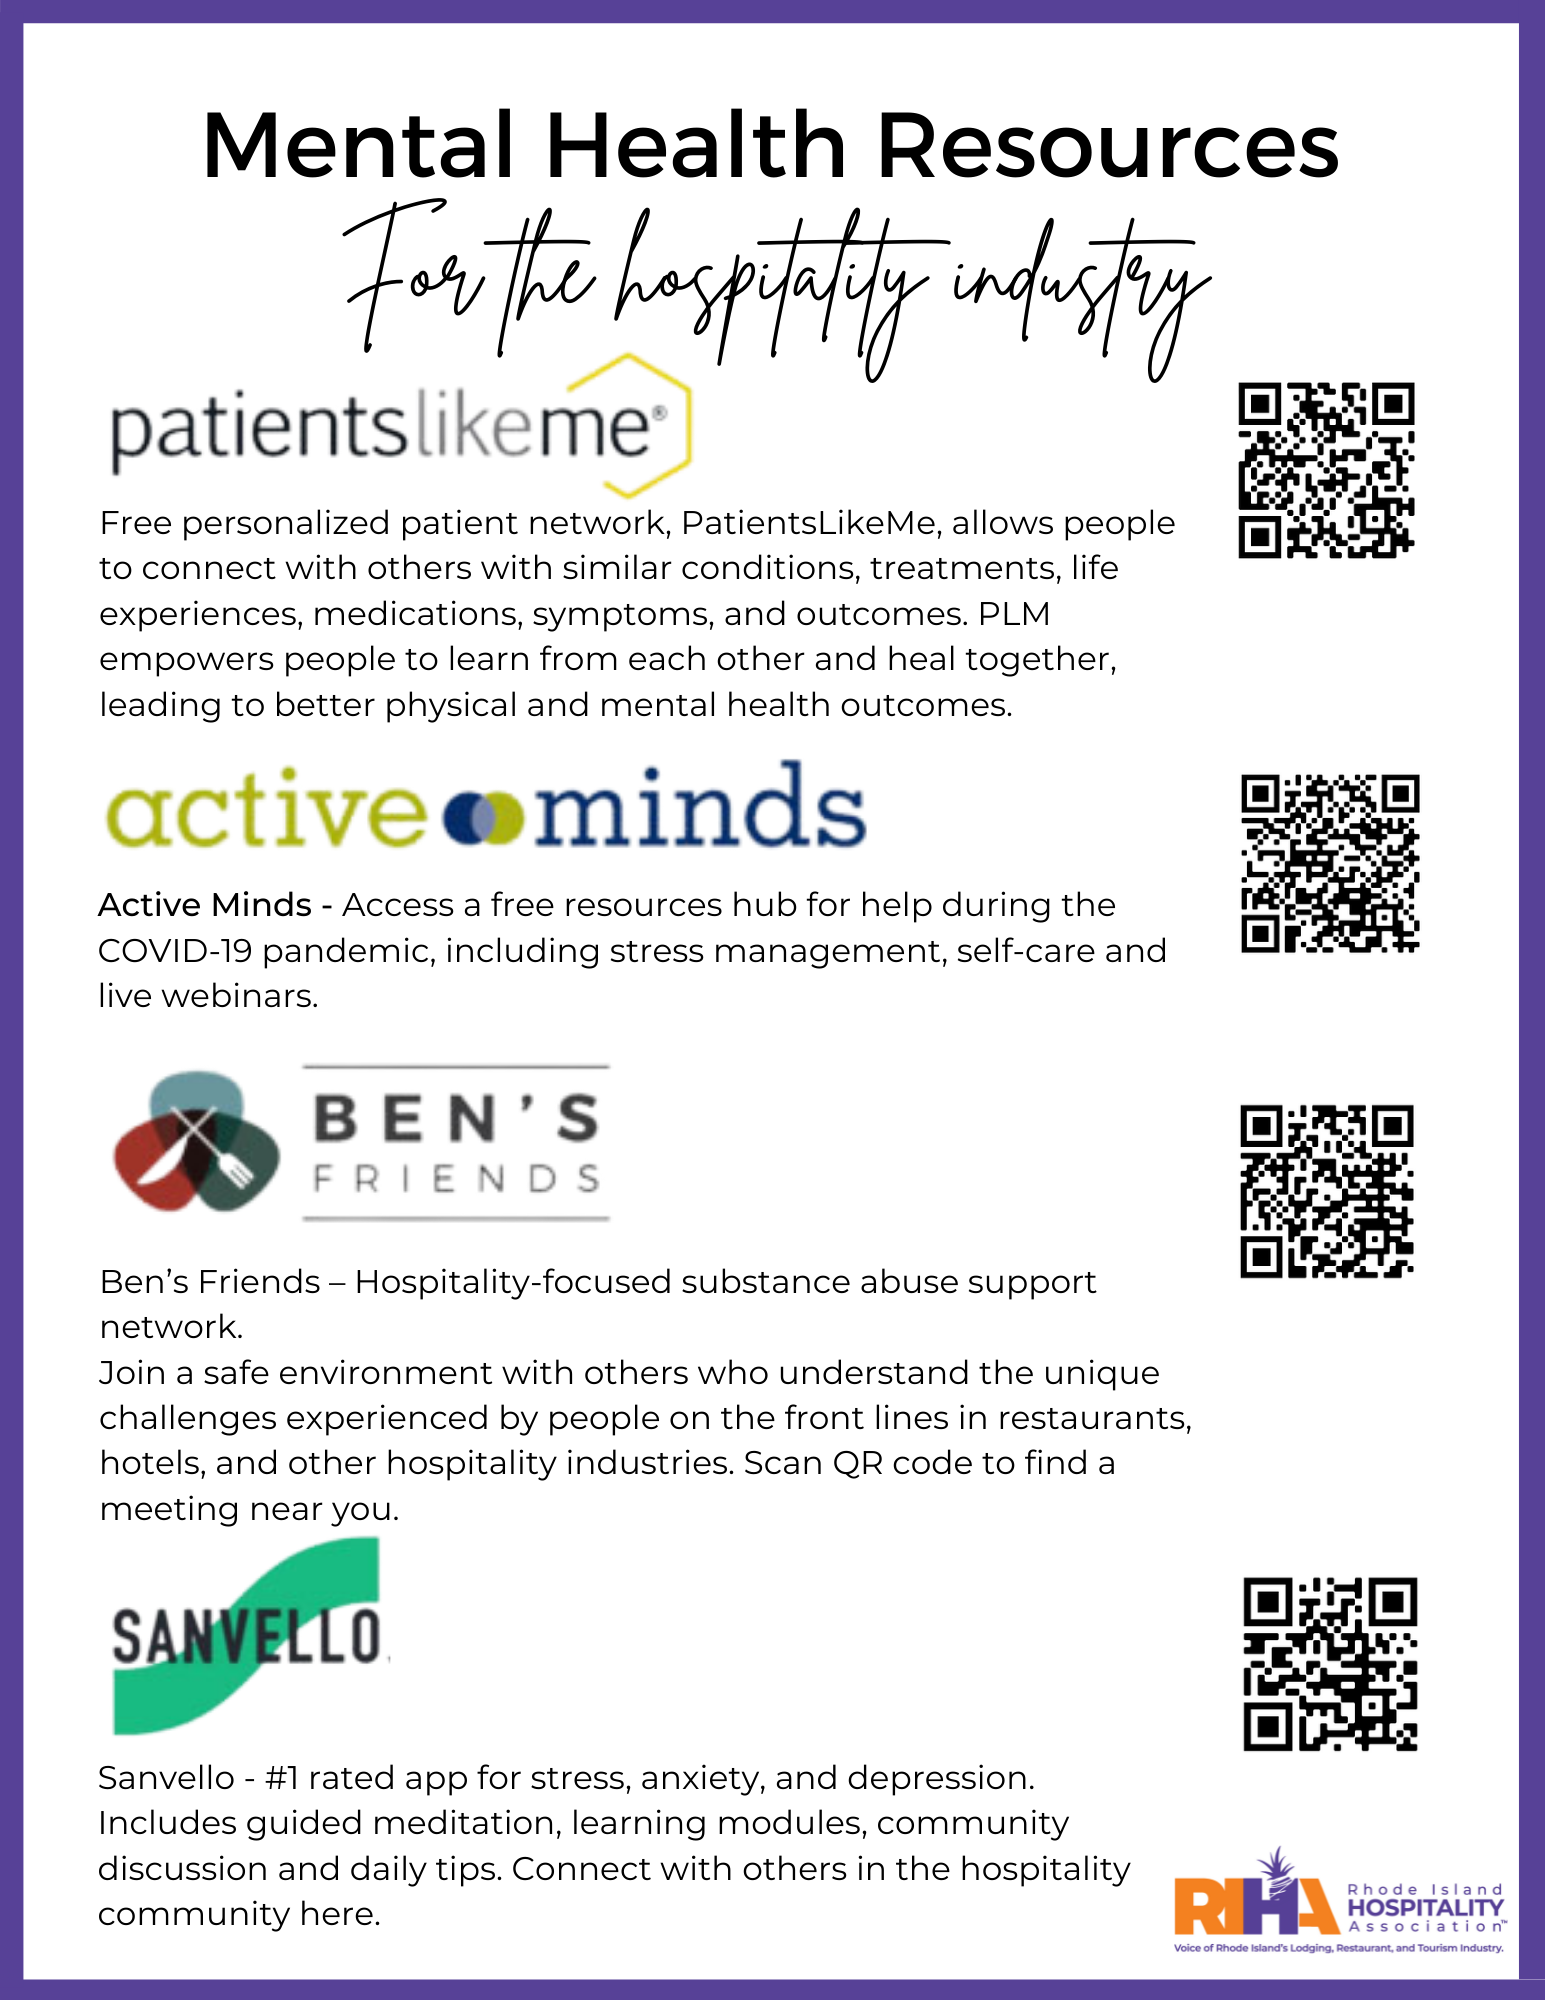 Mental Health Resources Poster